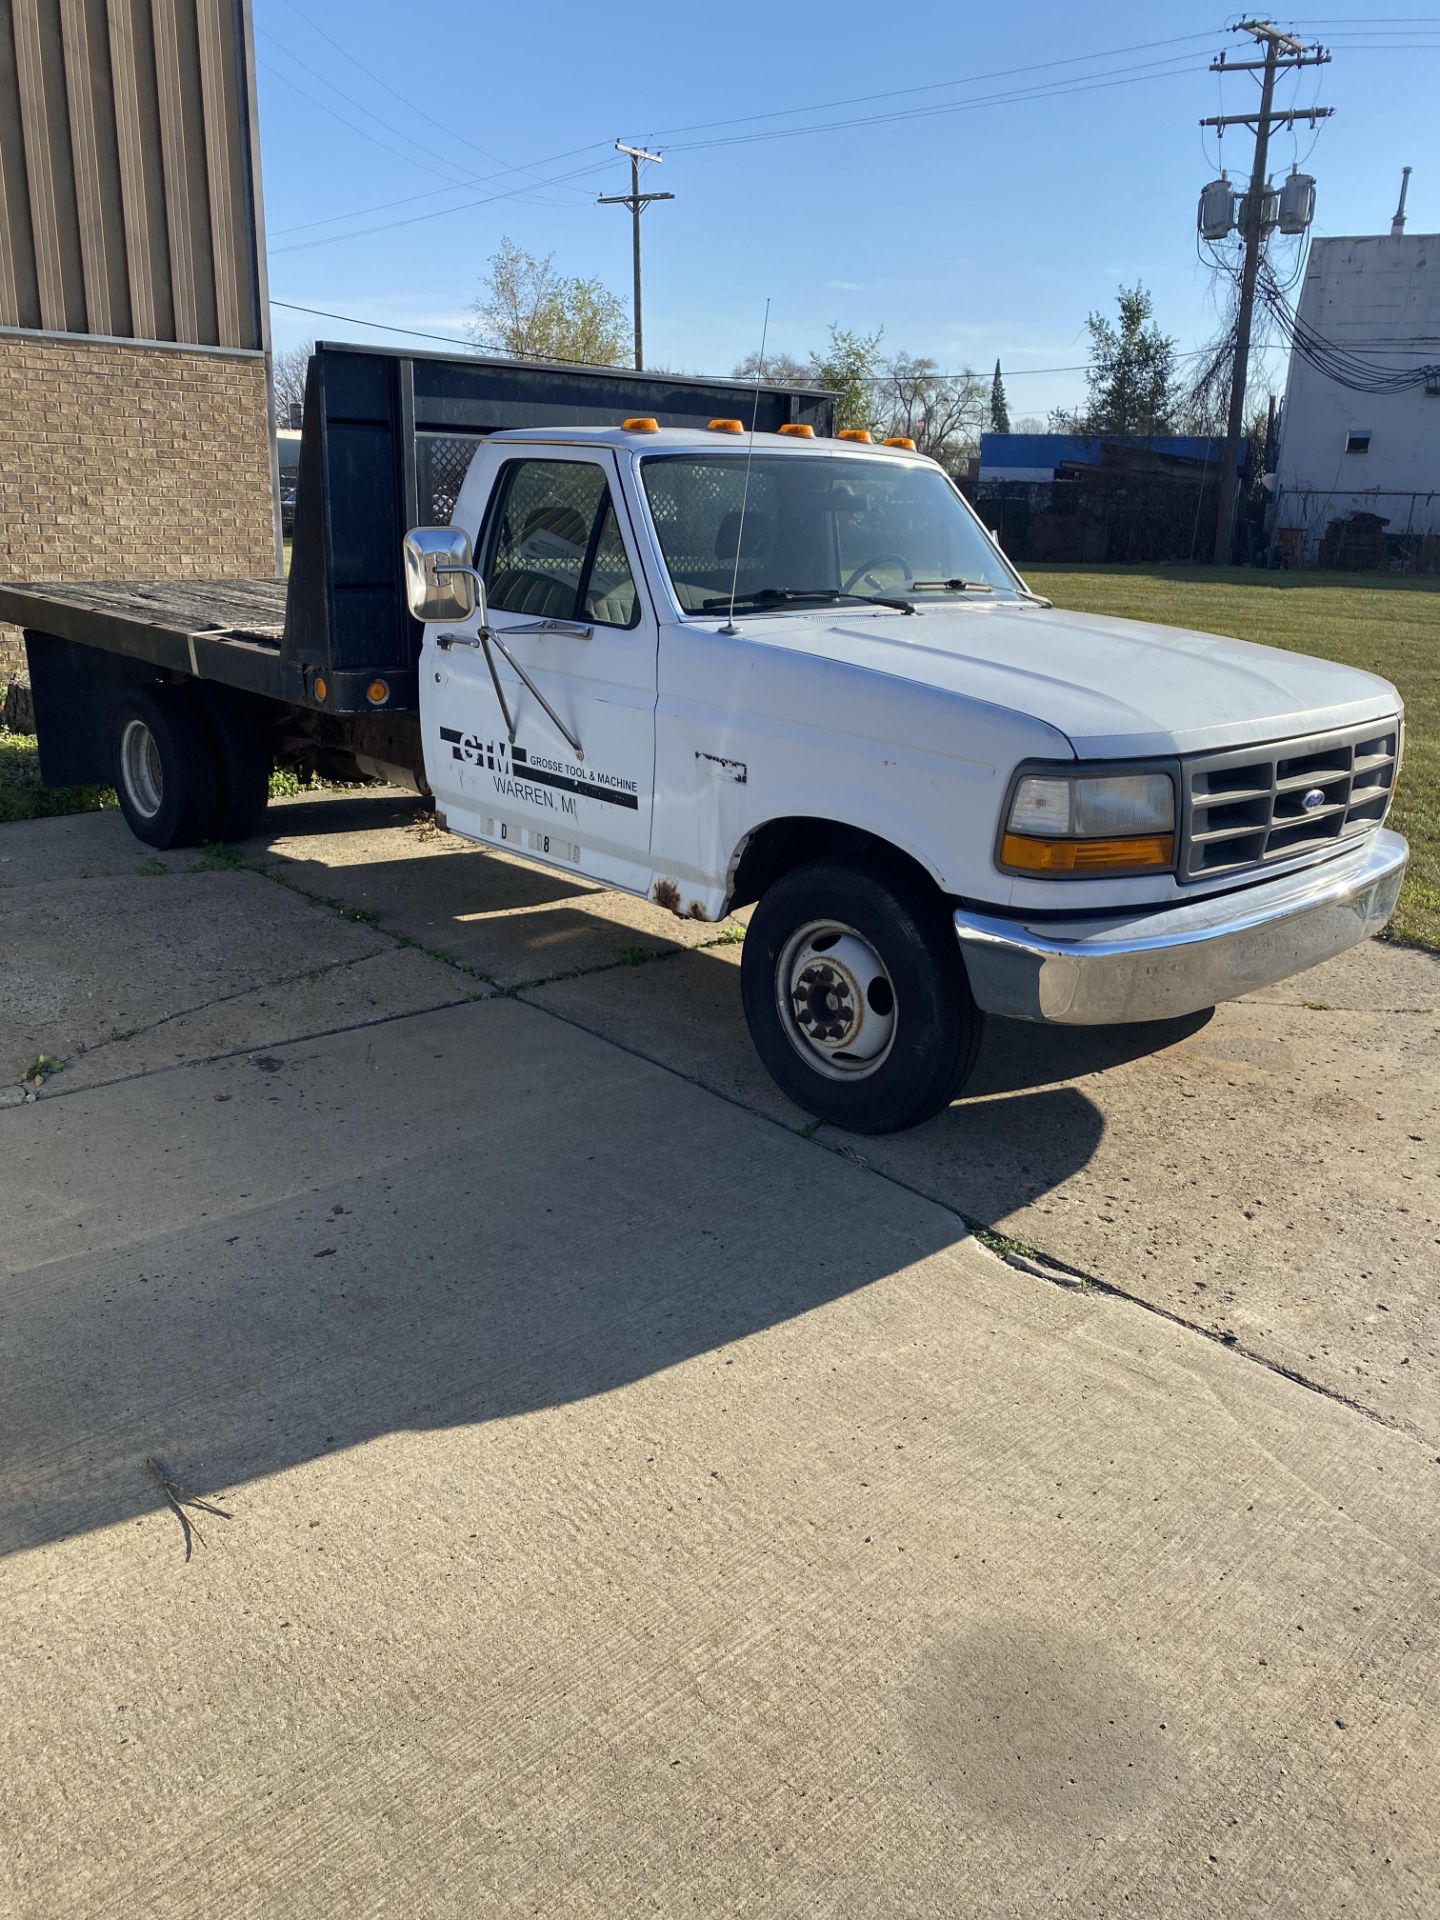 Ford F350 Stake Truck 12' Bed 1994 with 82k miles.